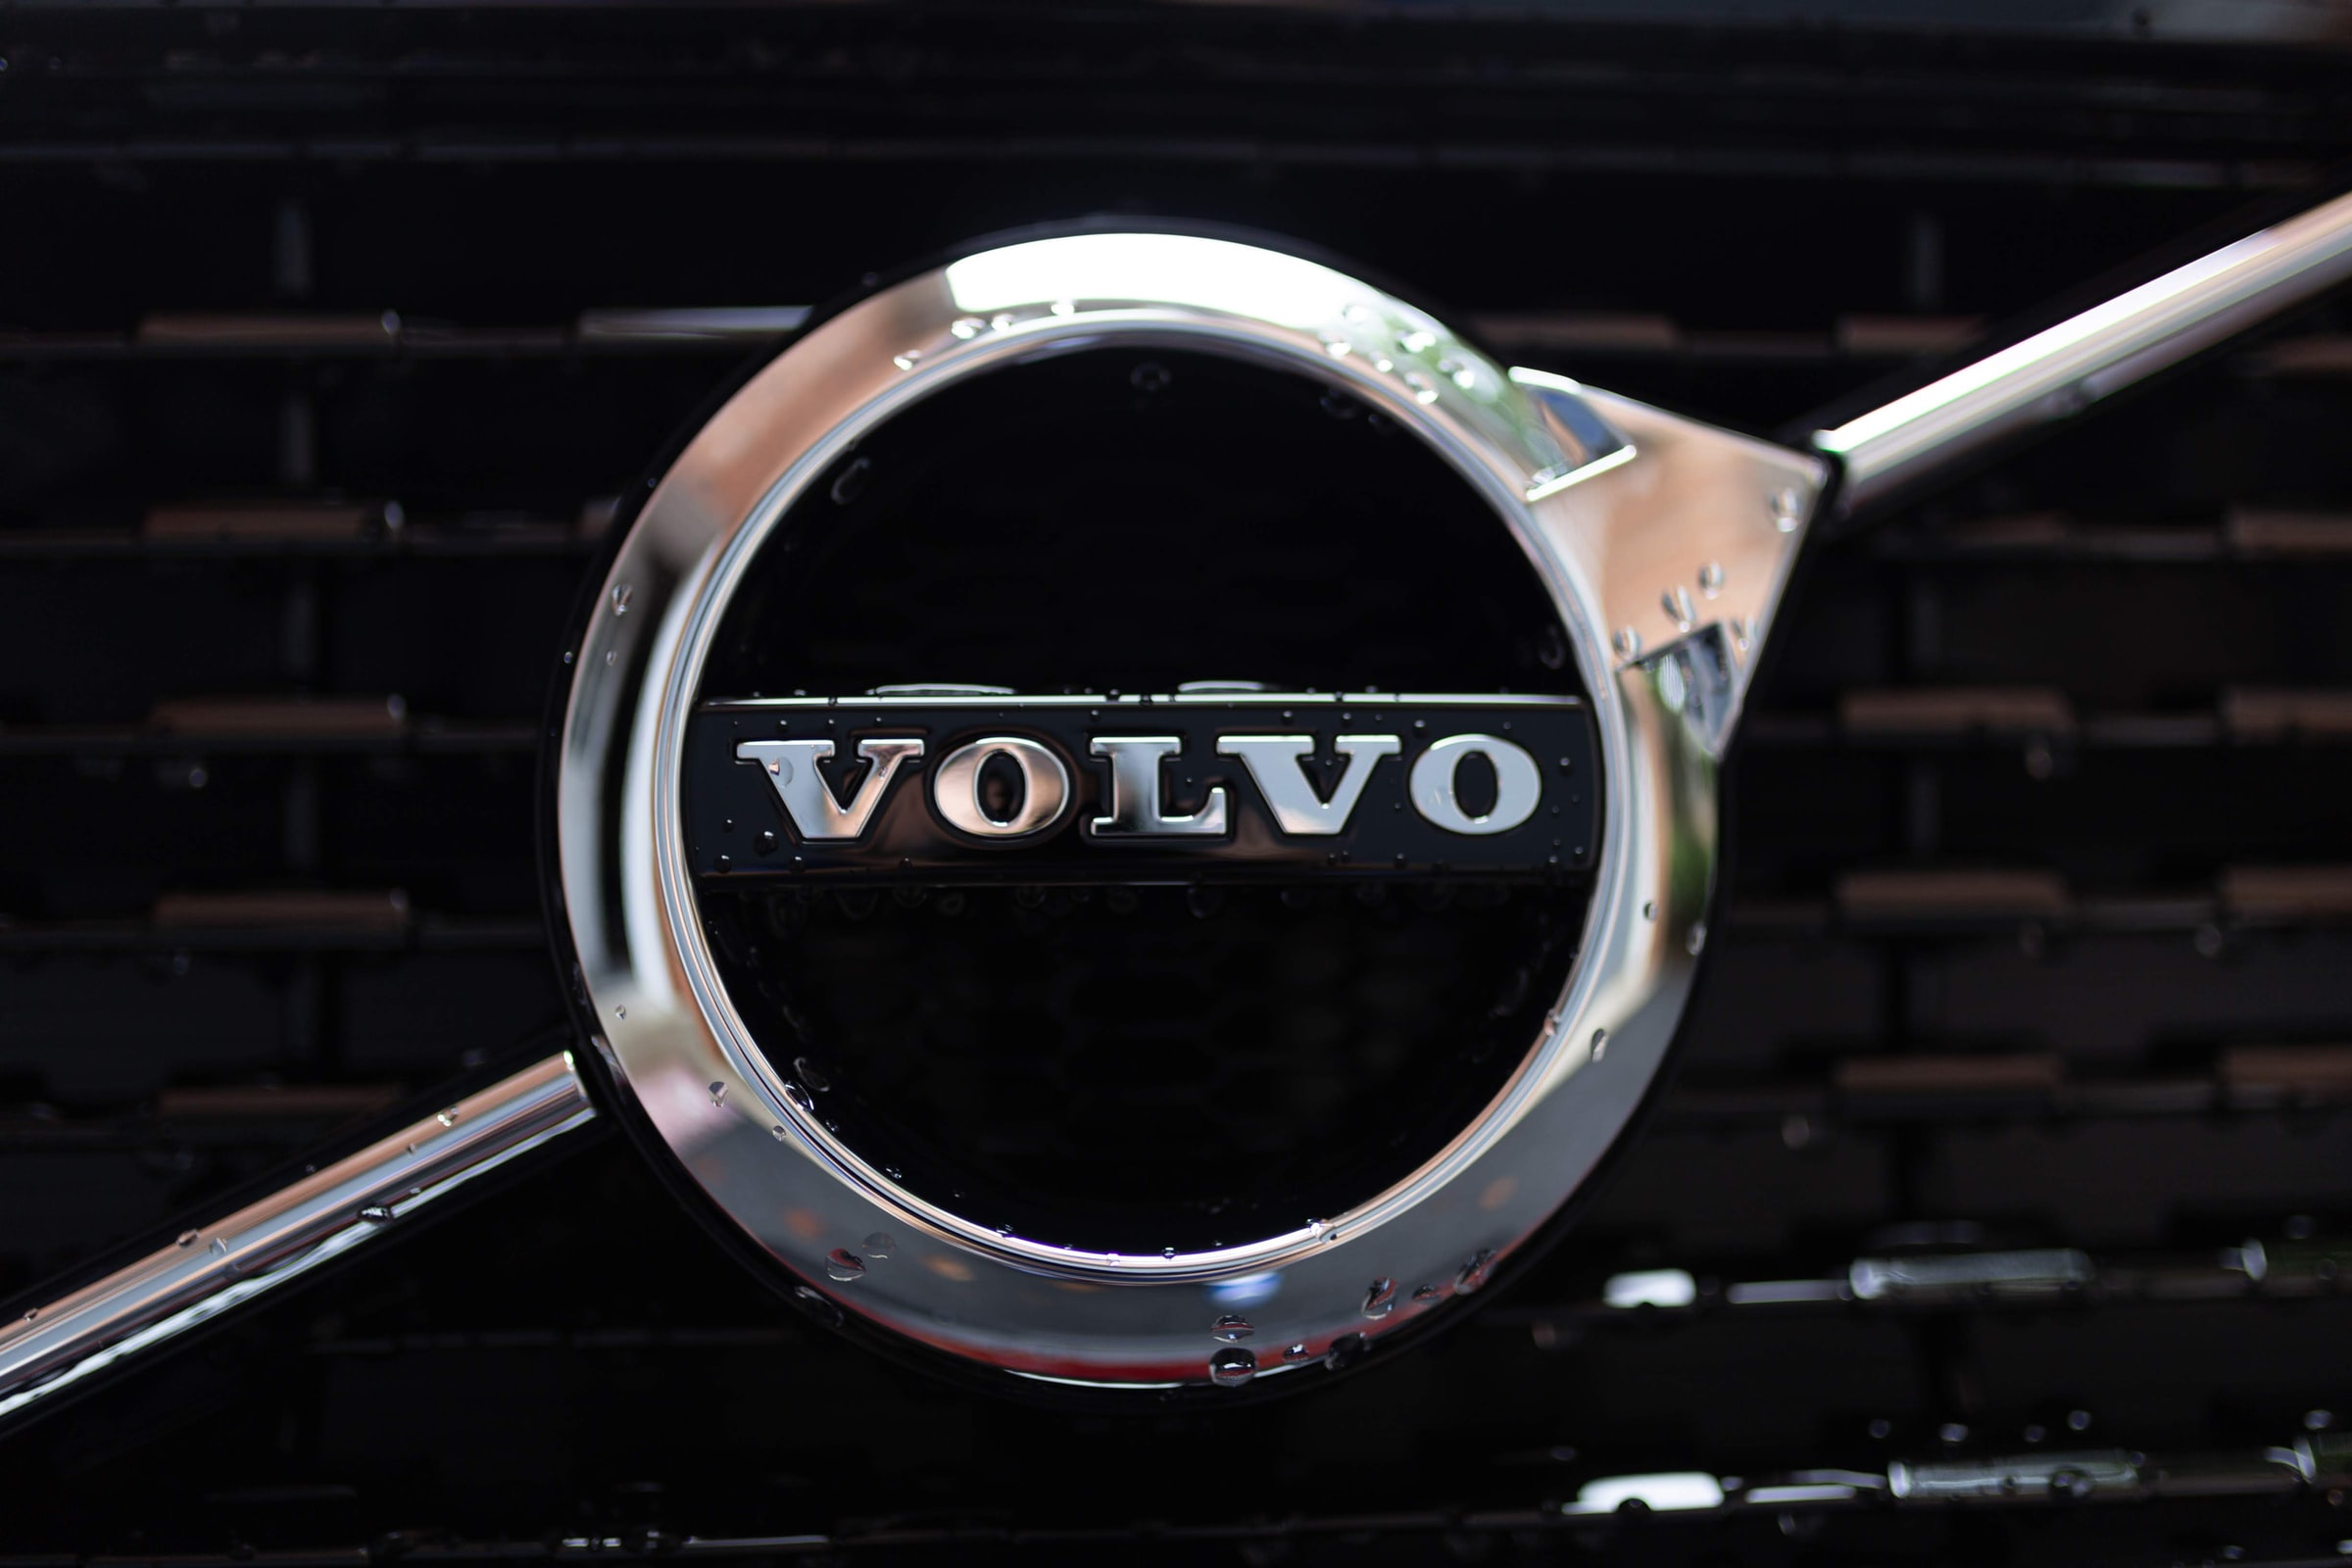 You are currently viewing Volvo Trucks Brings Electricity On The Road! Introducing the Volvo VNR